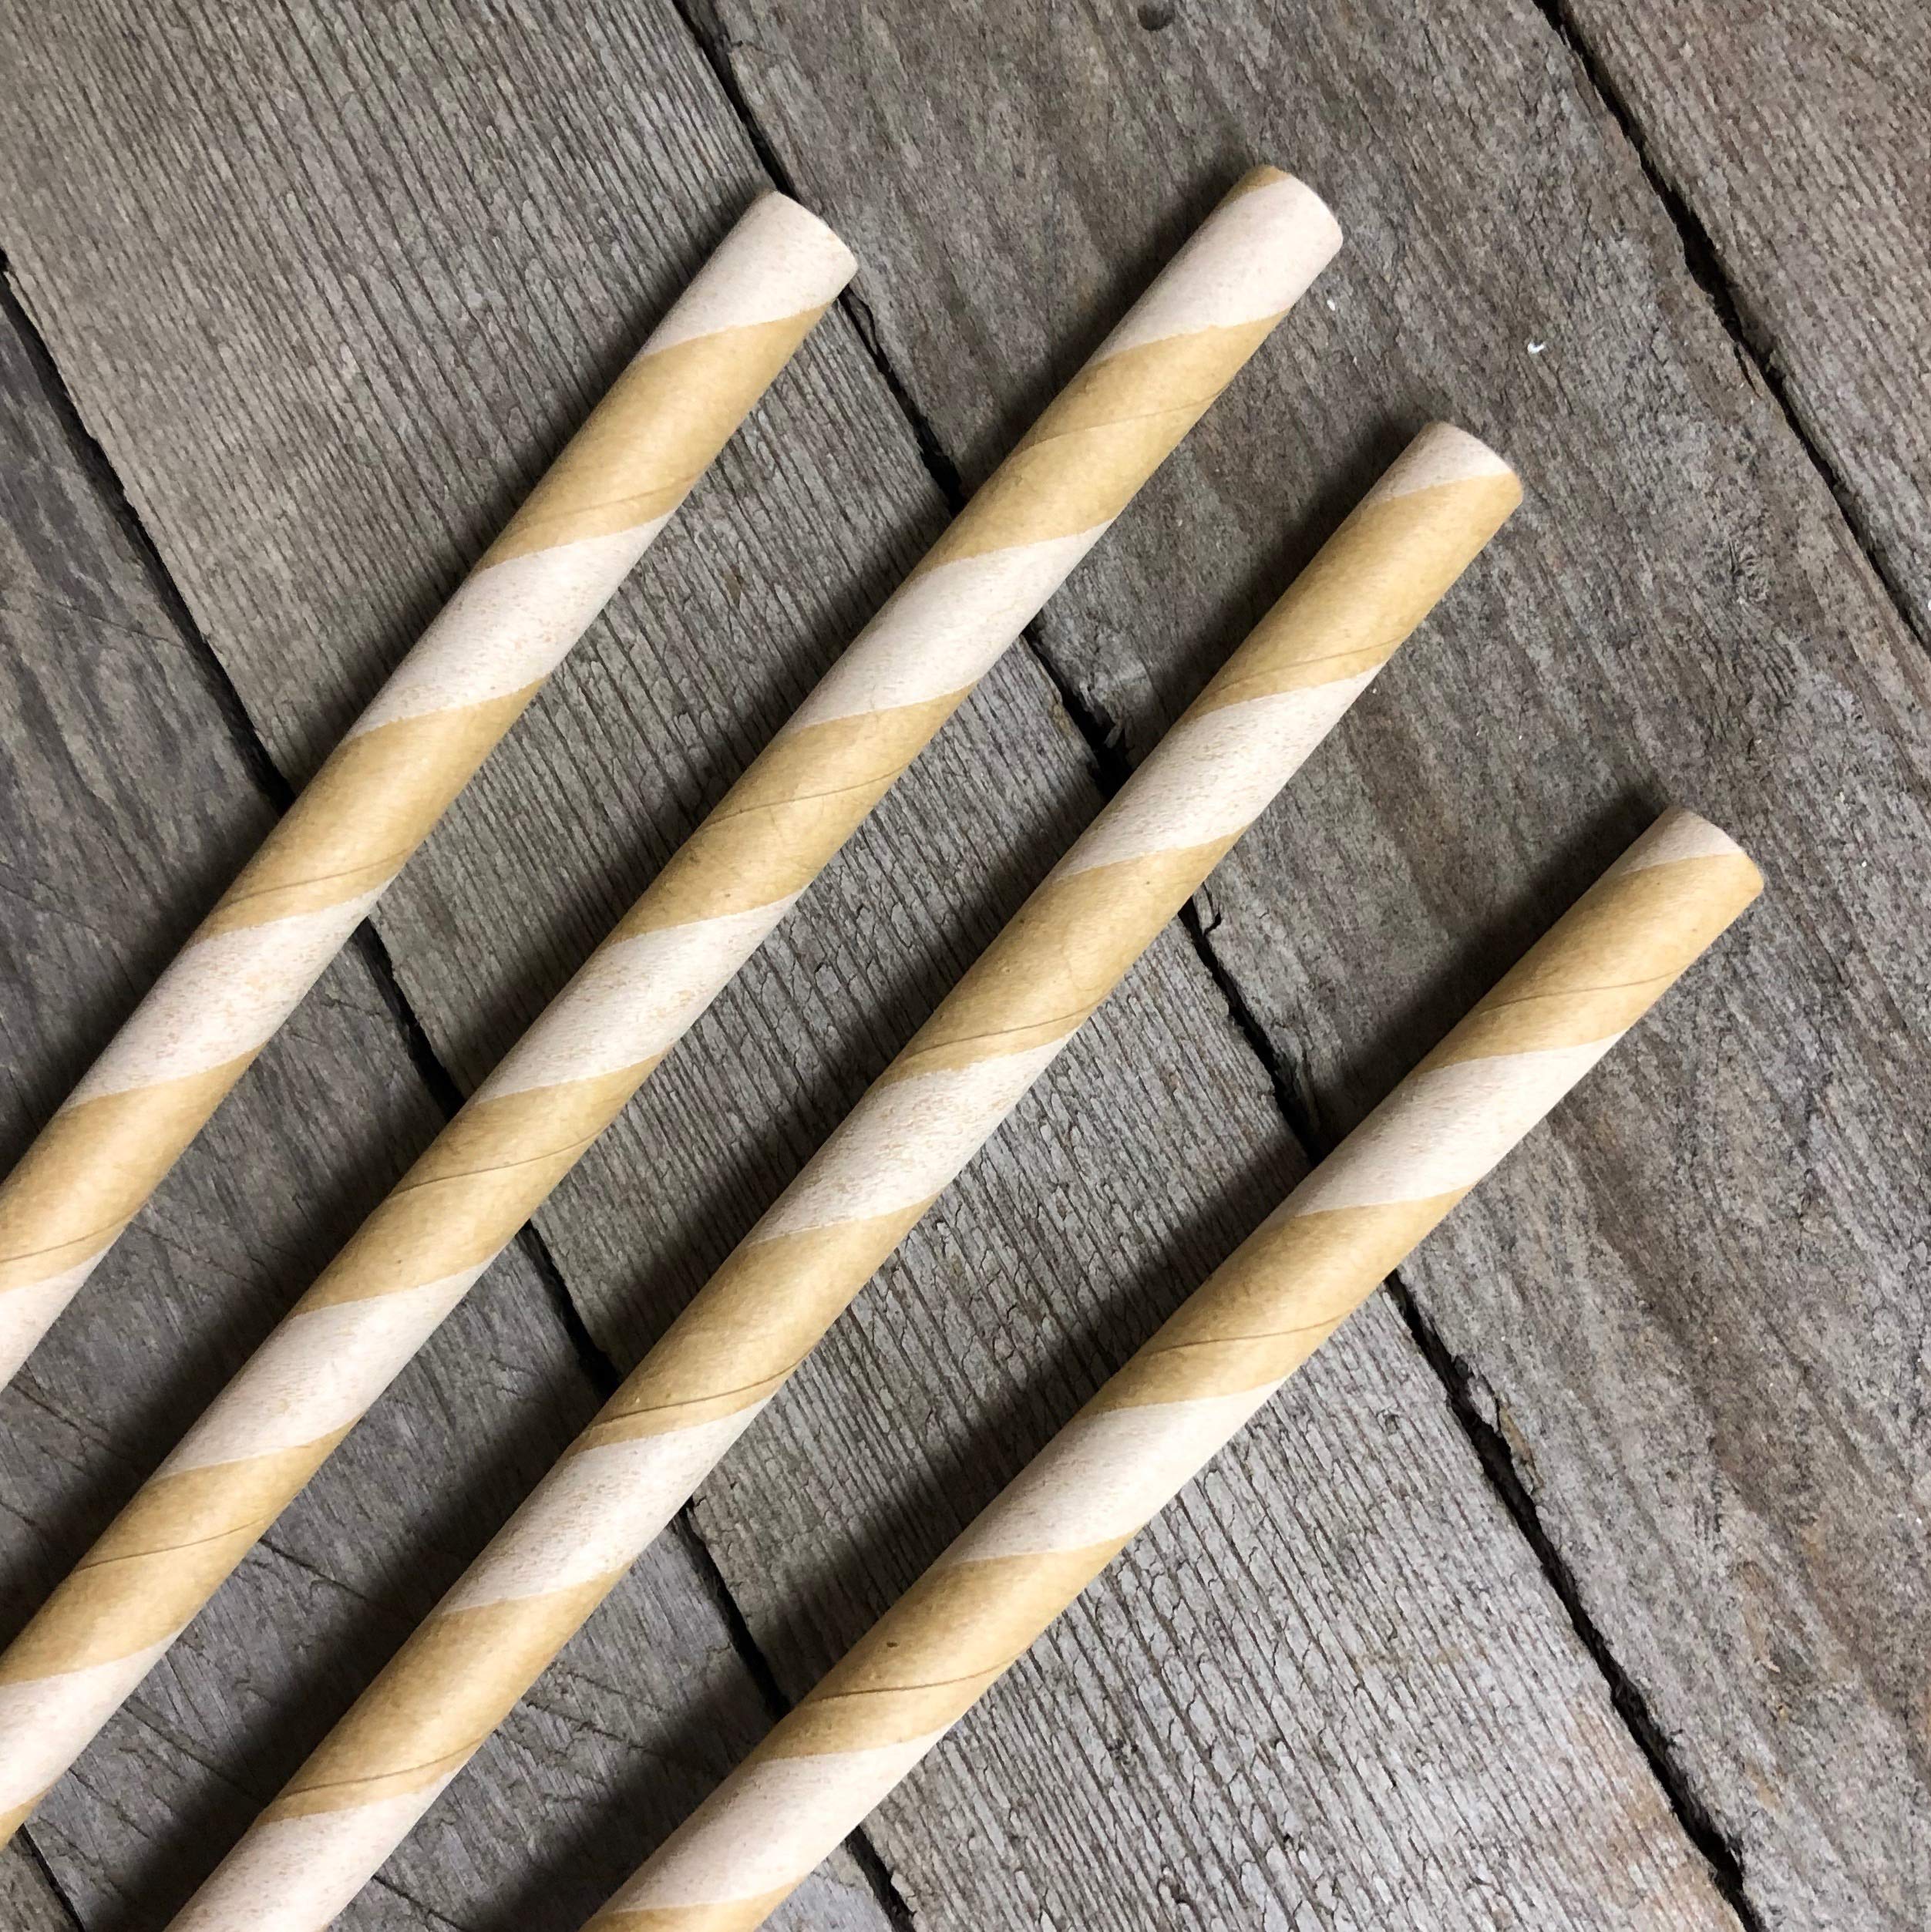 Paper Straws - Kraft Brown - Stripe - 7.75 Inches - 100 Pack Outside the Box Papers Brand